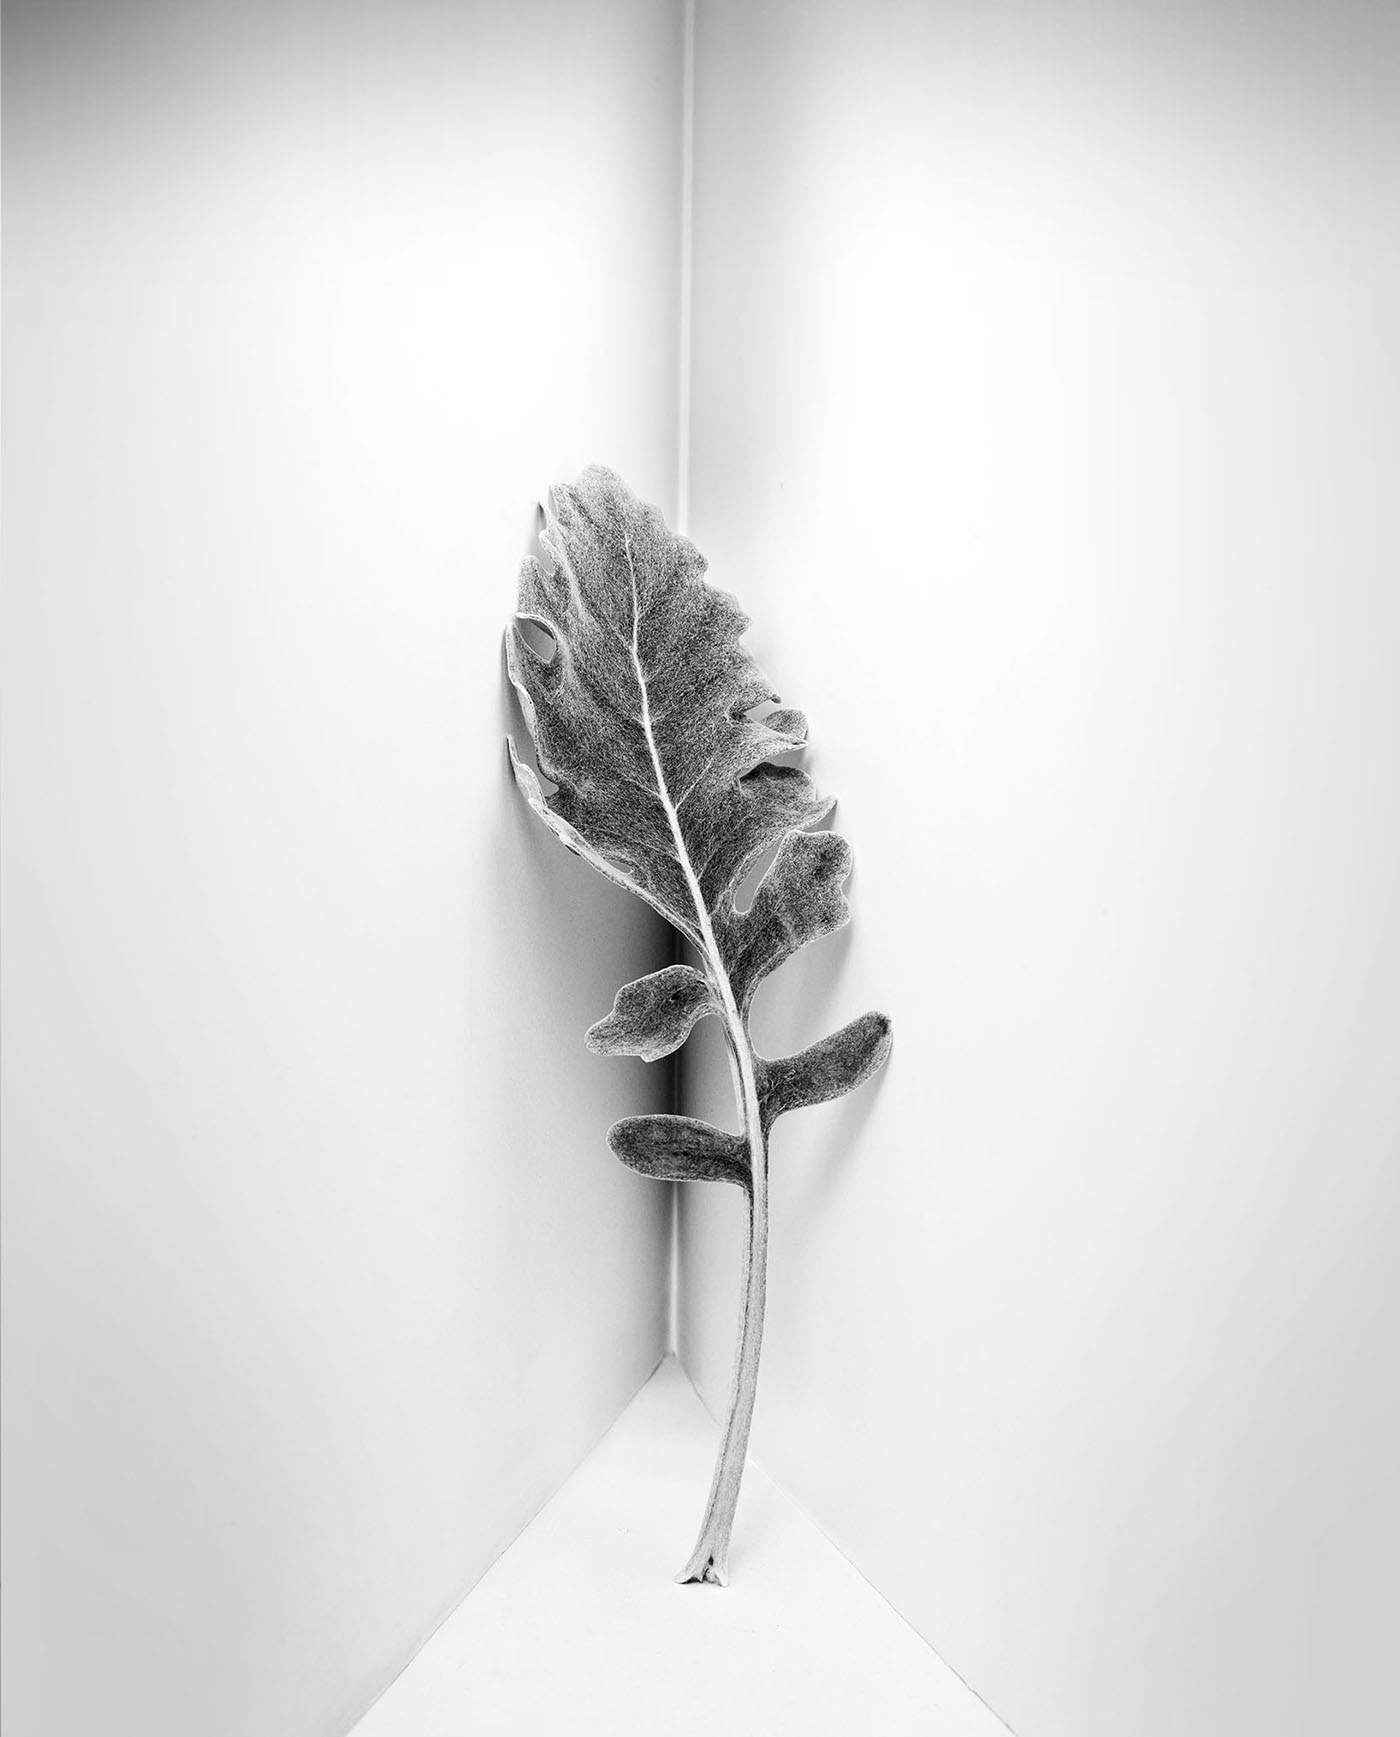 still life black and white medium format Product Photography david butler table top flower conceptual photography